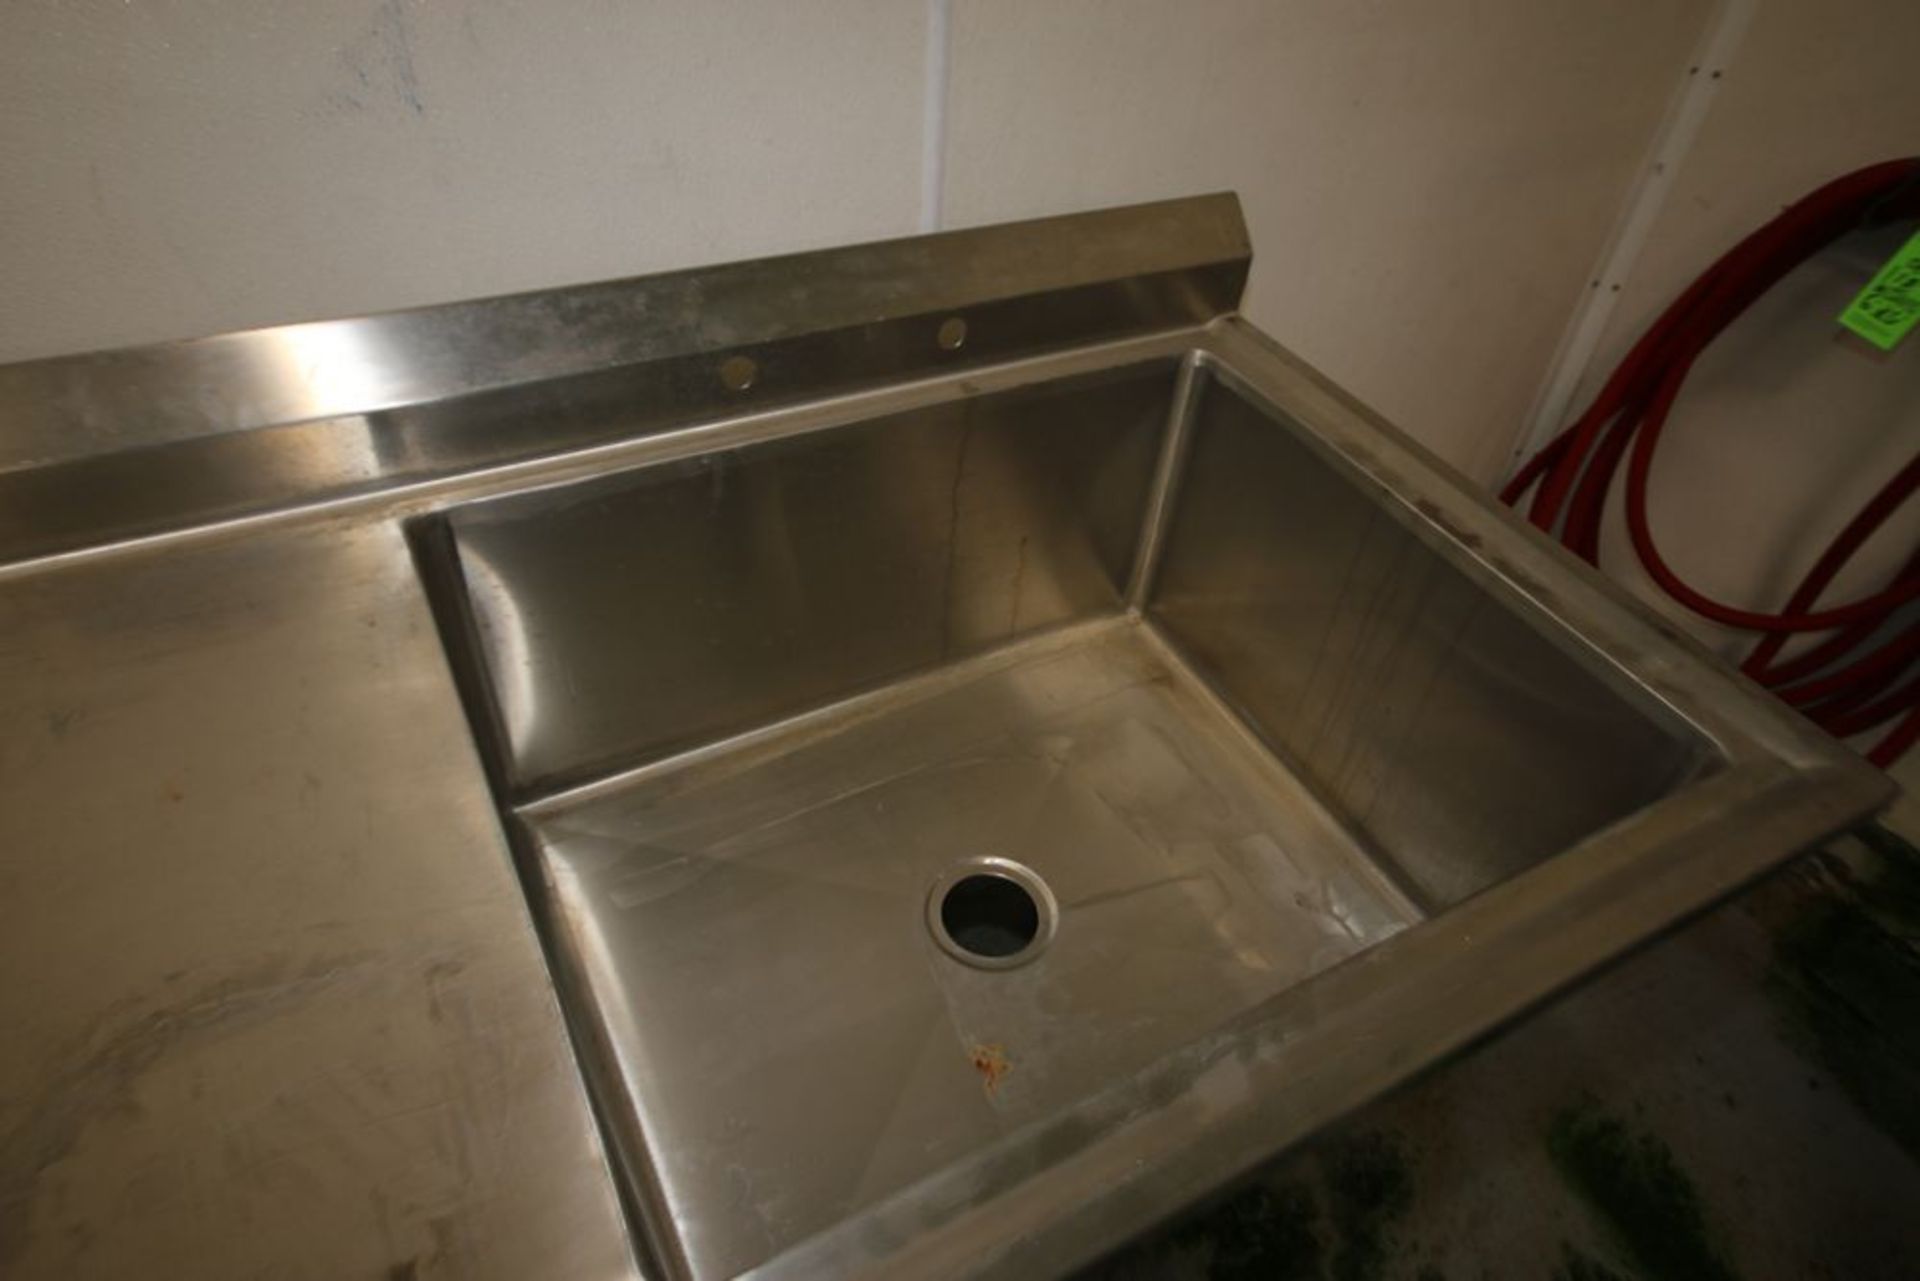 NFS S/S Sink Frame & Counter, Overall Dims.: Aprox 72" L x 30" W x 34-1/2" H (LOCATED IN GLOUCESTER, - Image 2 of 2